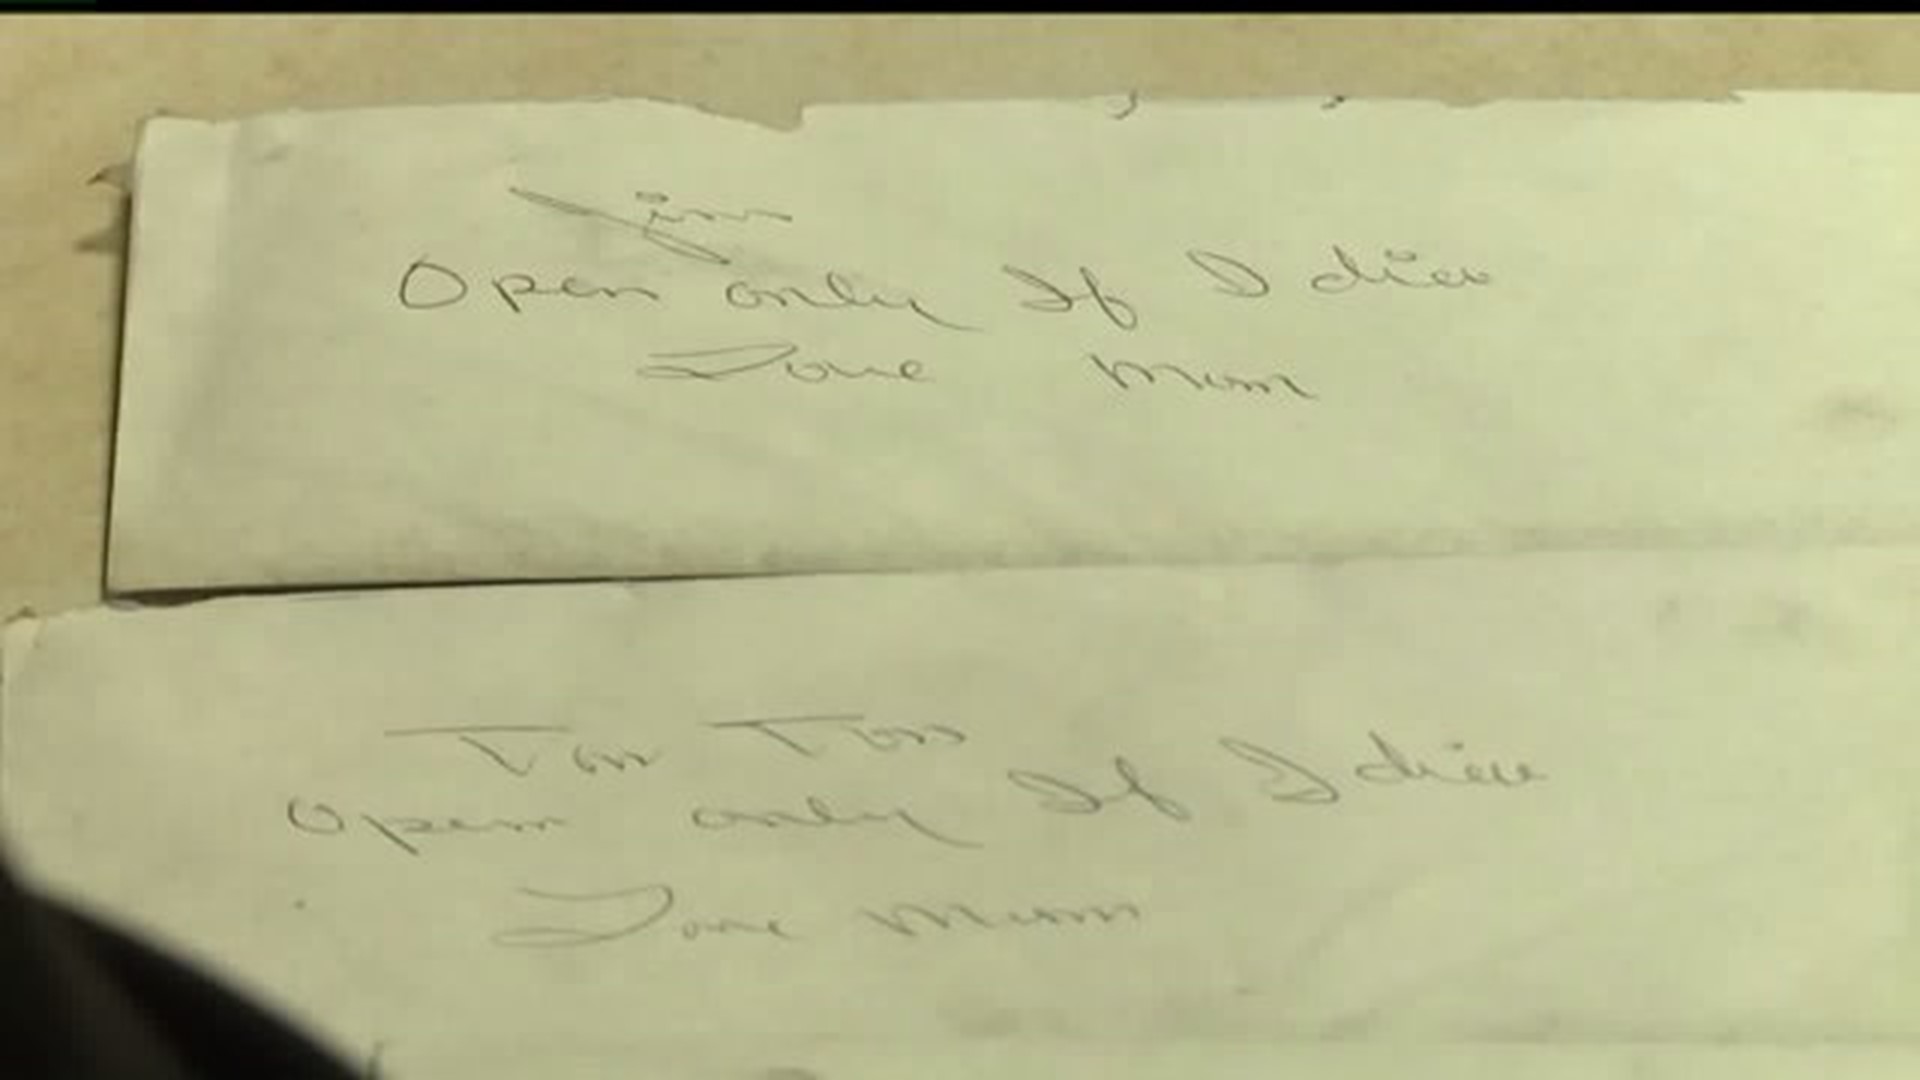 Family of York couple who died in fire finds letters: "Only open if I die"